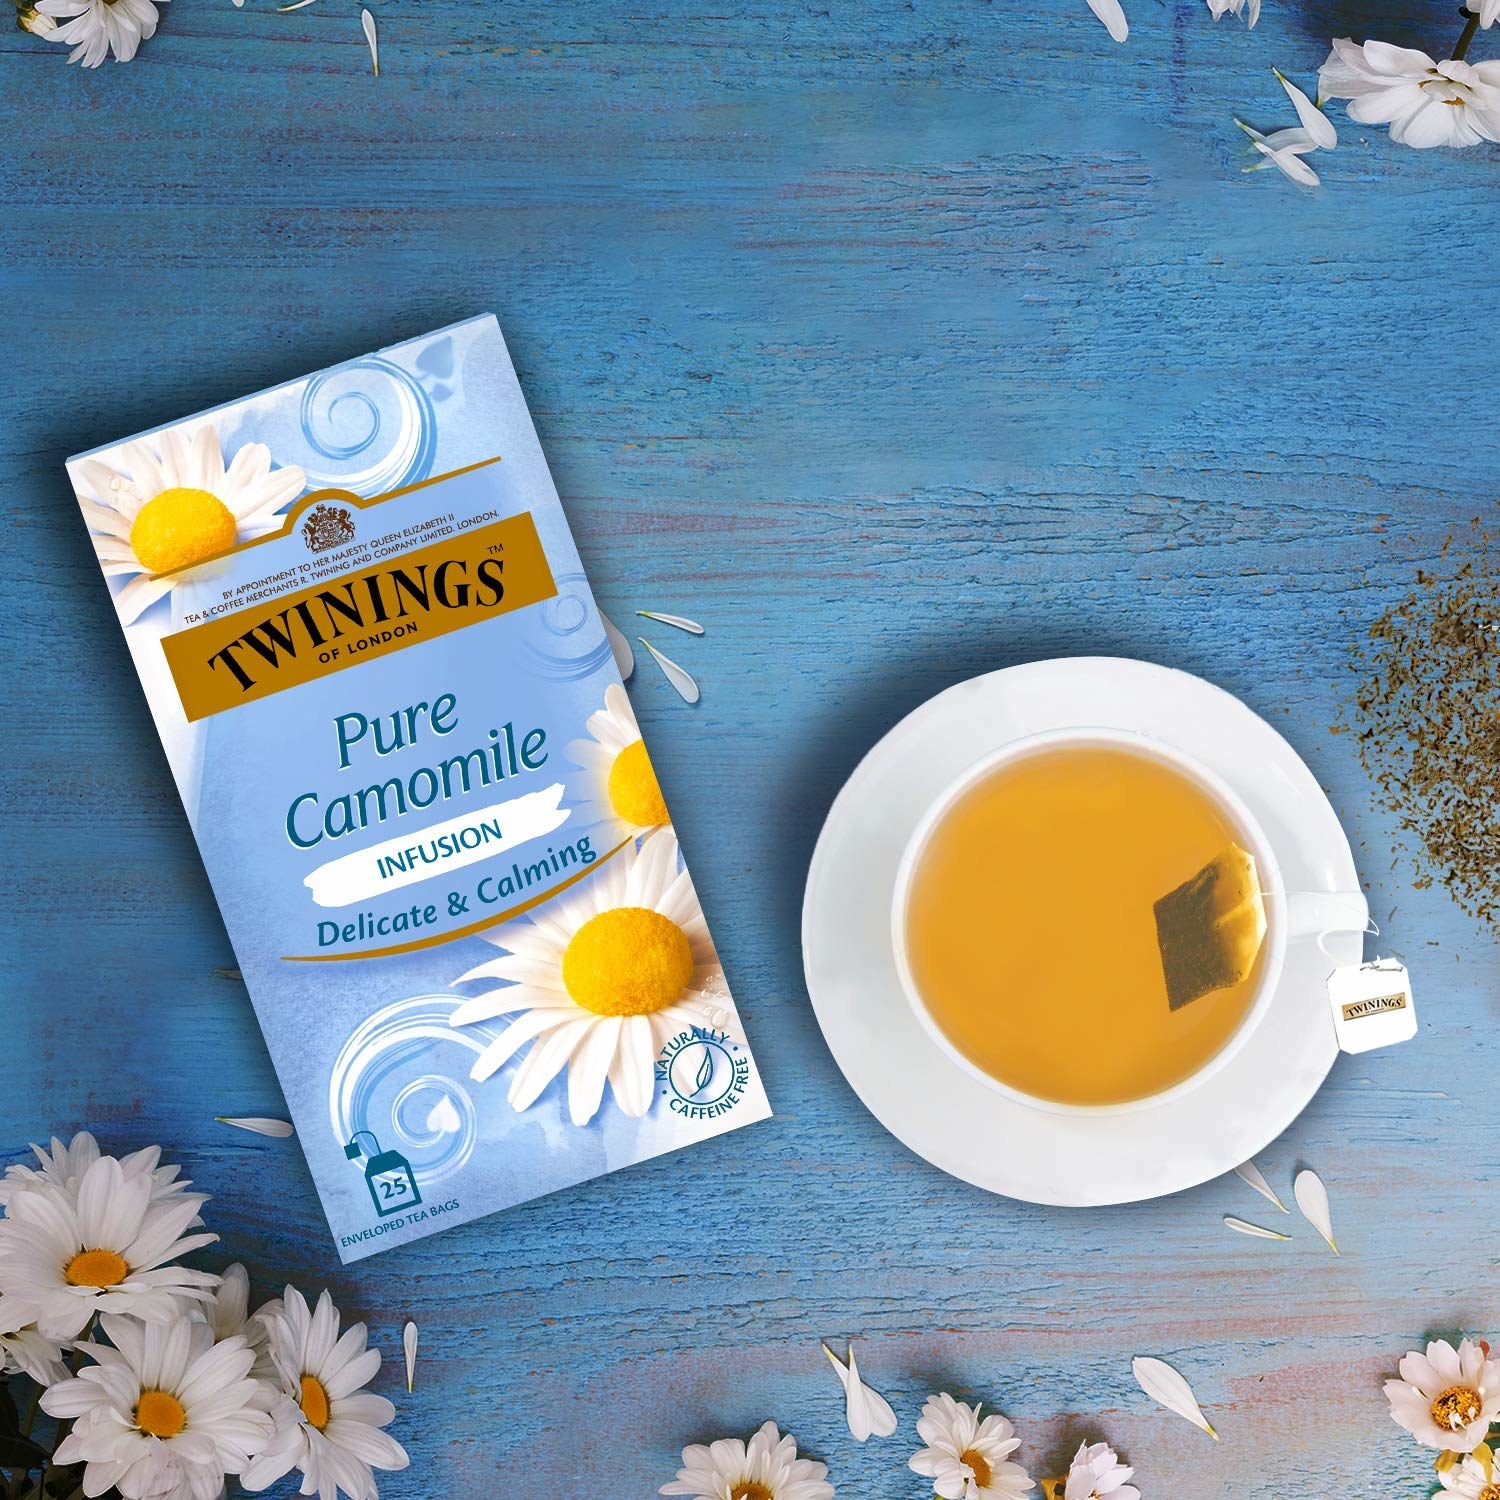 The pack of tea pictured with a cup of camomile tea and camomile flowers